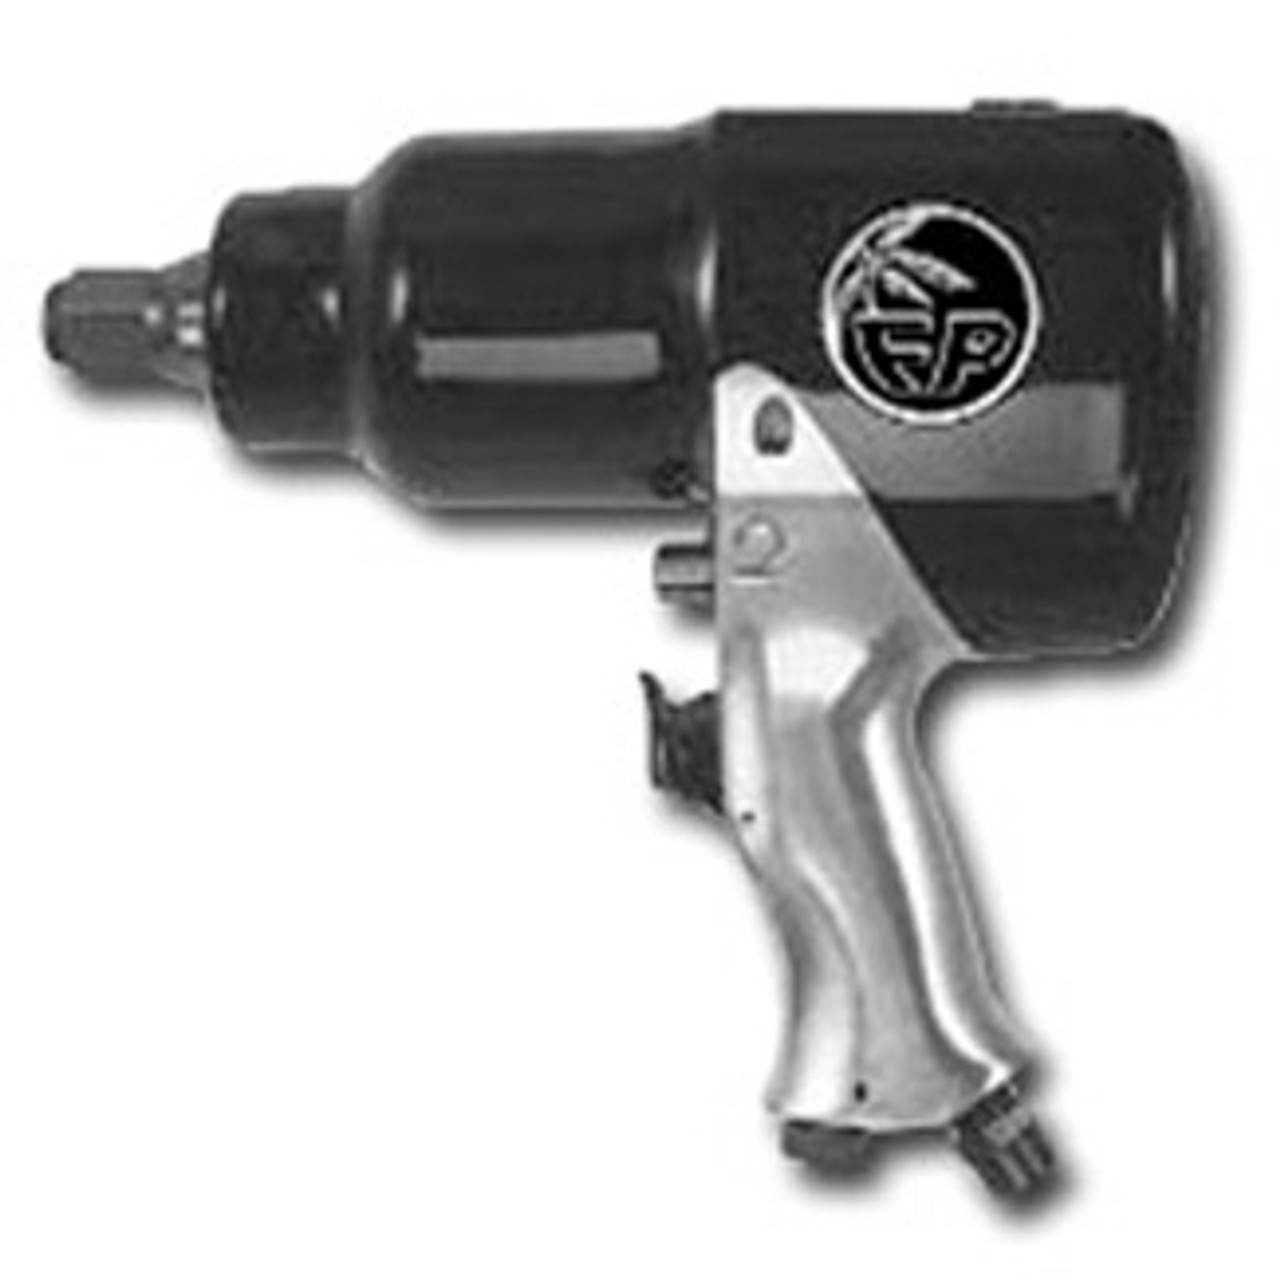 3/4in. Pistol Impact Wrench with Protective Cover